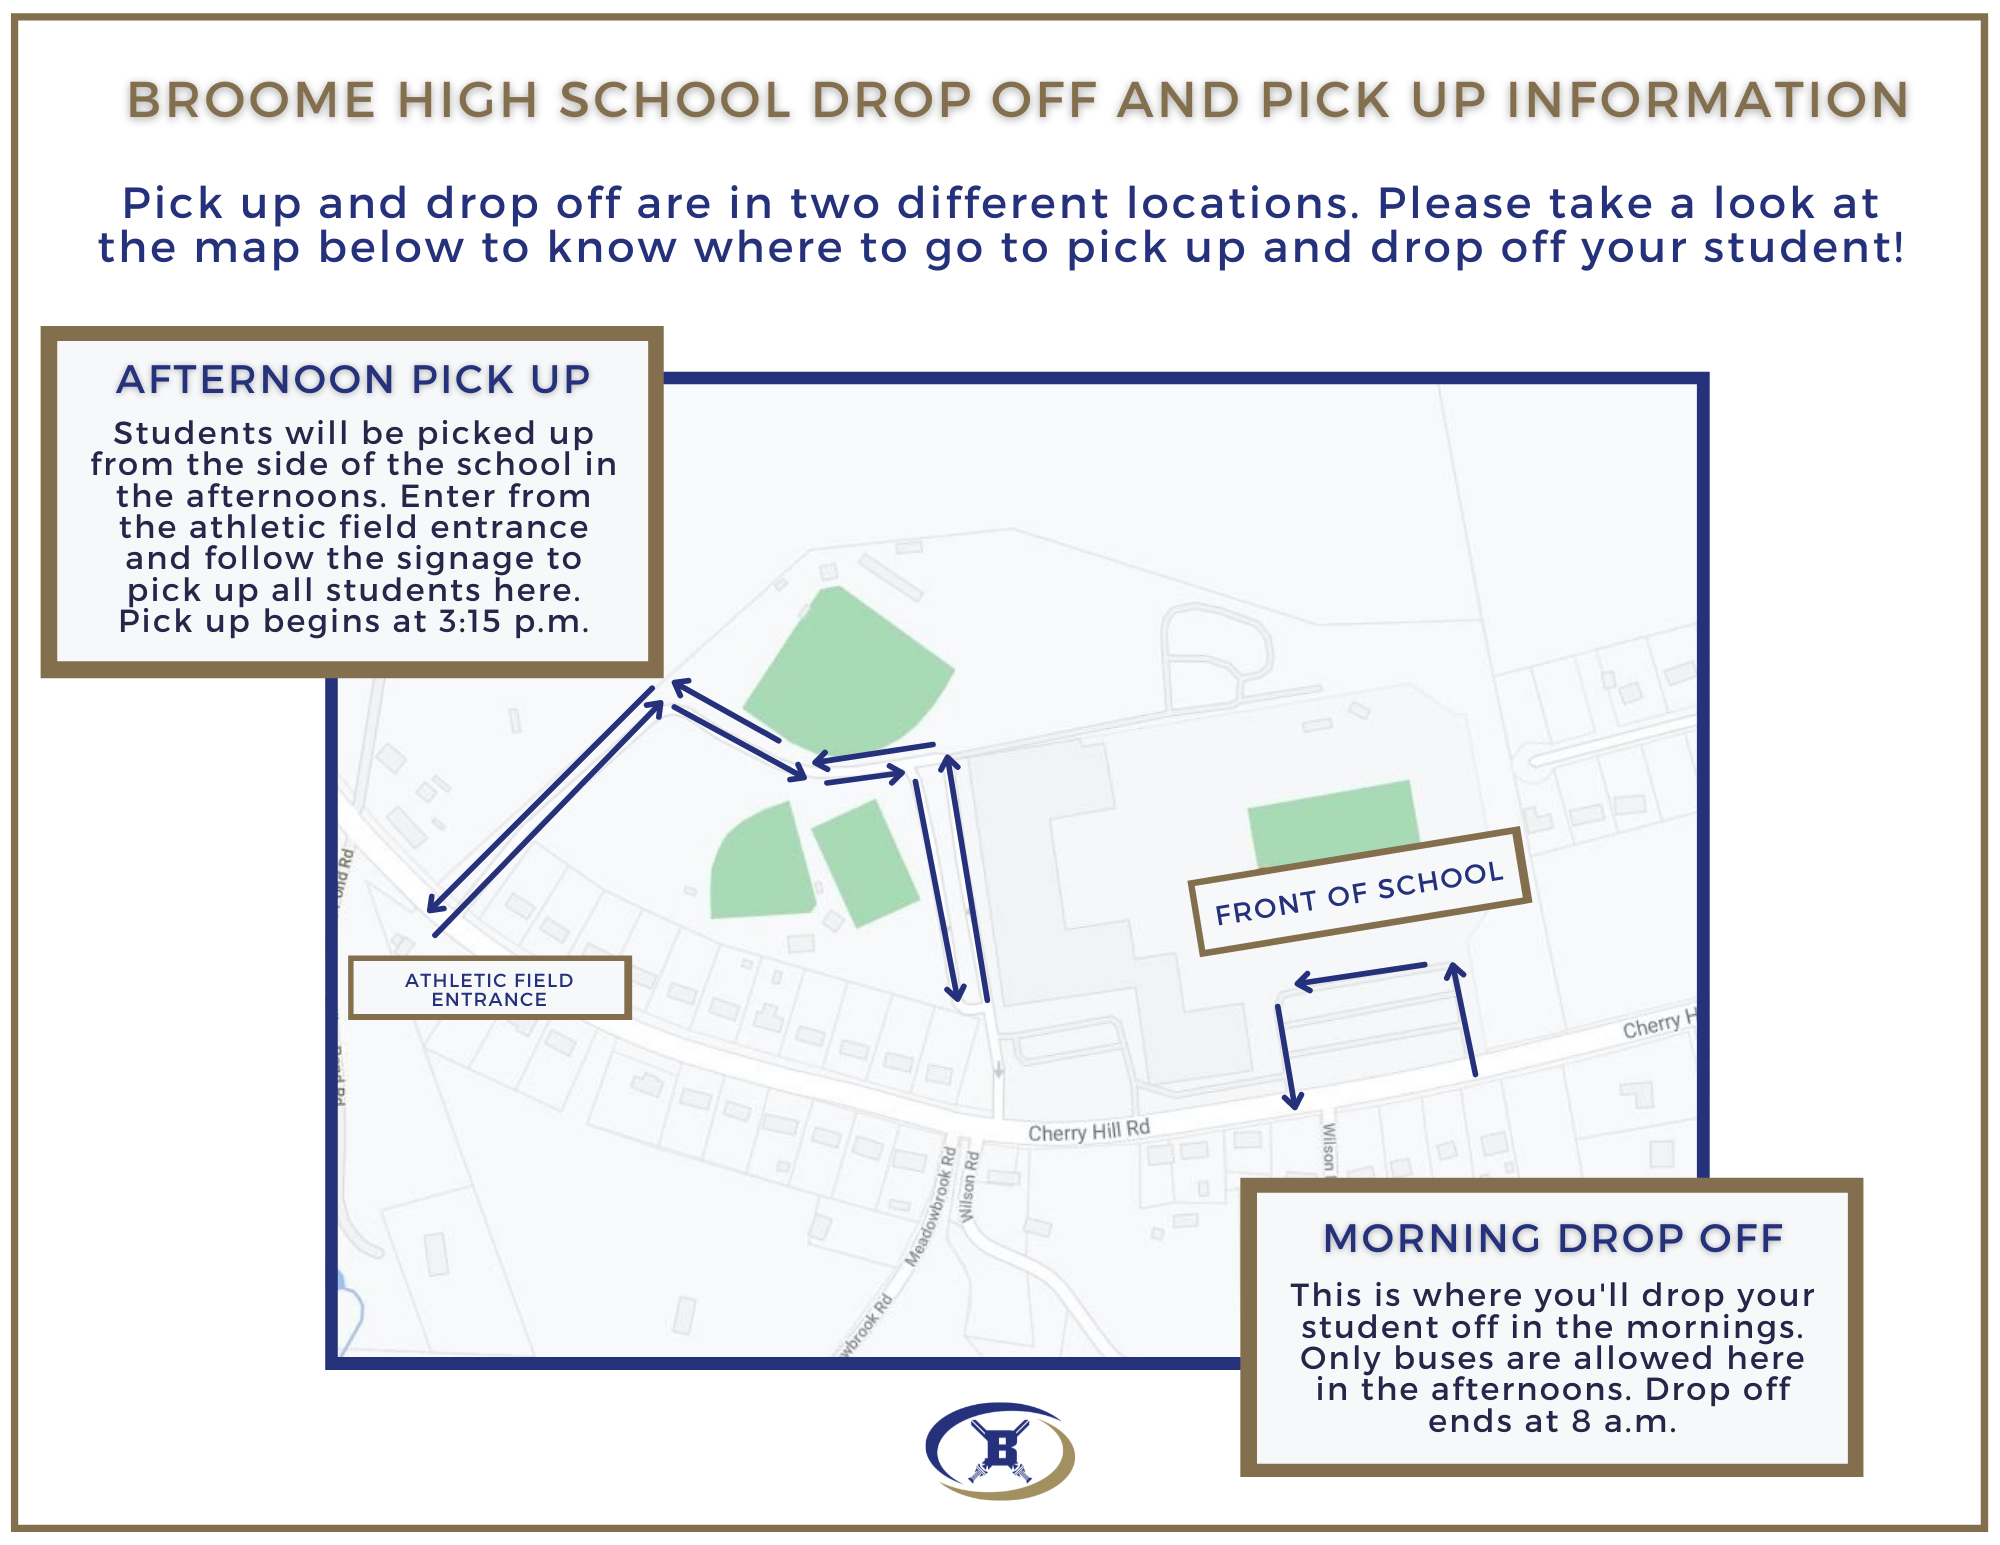 BROOME HIGH SCHOOL DROP OFF AND PICK UP INFORMATION Pick up and drop off are in two different locations. Please take a look at the map below to know where to go to pick up and drop off your student!  AFTERNOON PICK UP Students will be picked up from the side of the school in the afternoons. Enter from the athletic field entrance and follow the signage to pick up all students here. Pick up begins at 3:15 p.m.  . Cherry Hill Rd :  MORNING DROP OFFS This is where you'll drop your s student off in the mornings. iOnly buses are allowed here in the afternoons. Drop off CK. ends at 8 a.m. # 9)